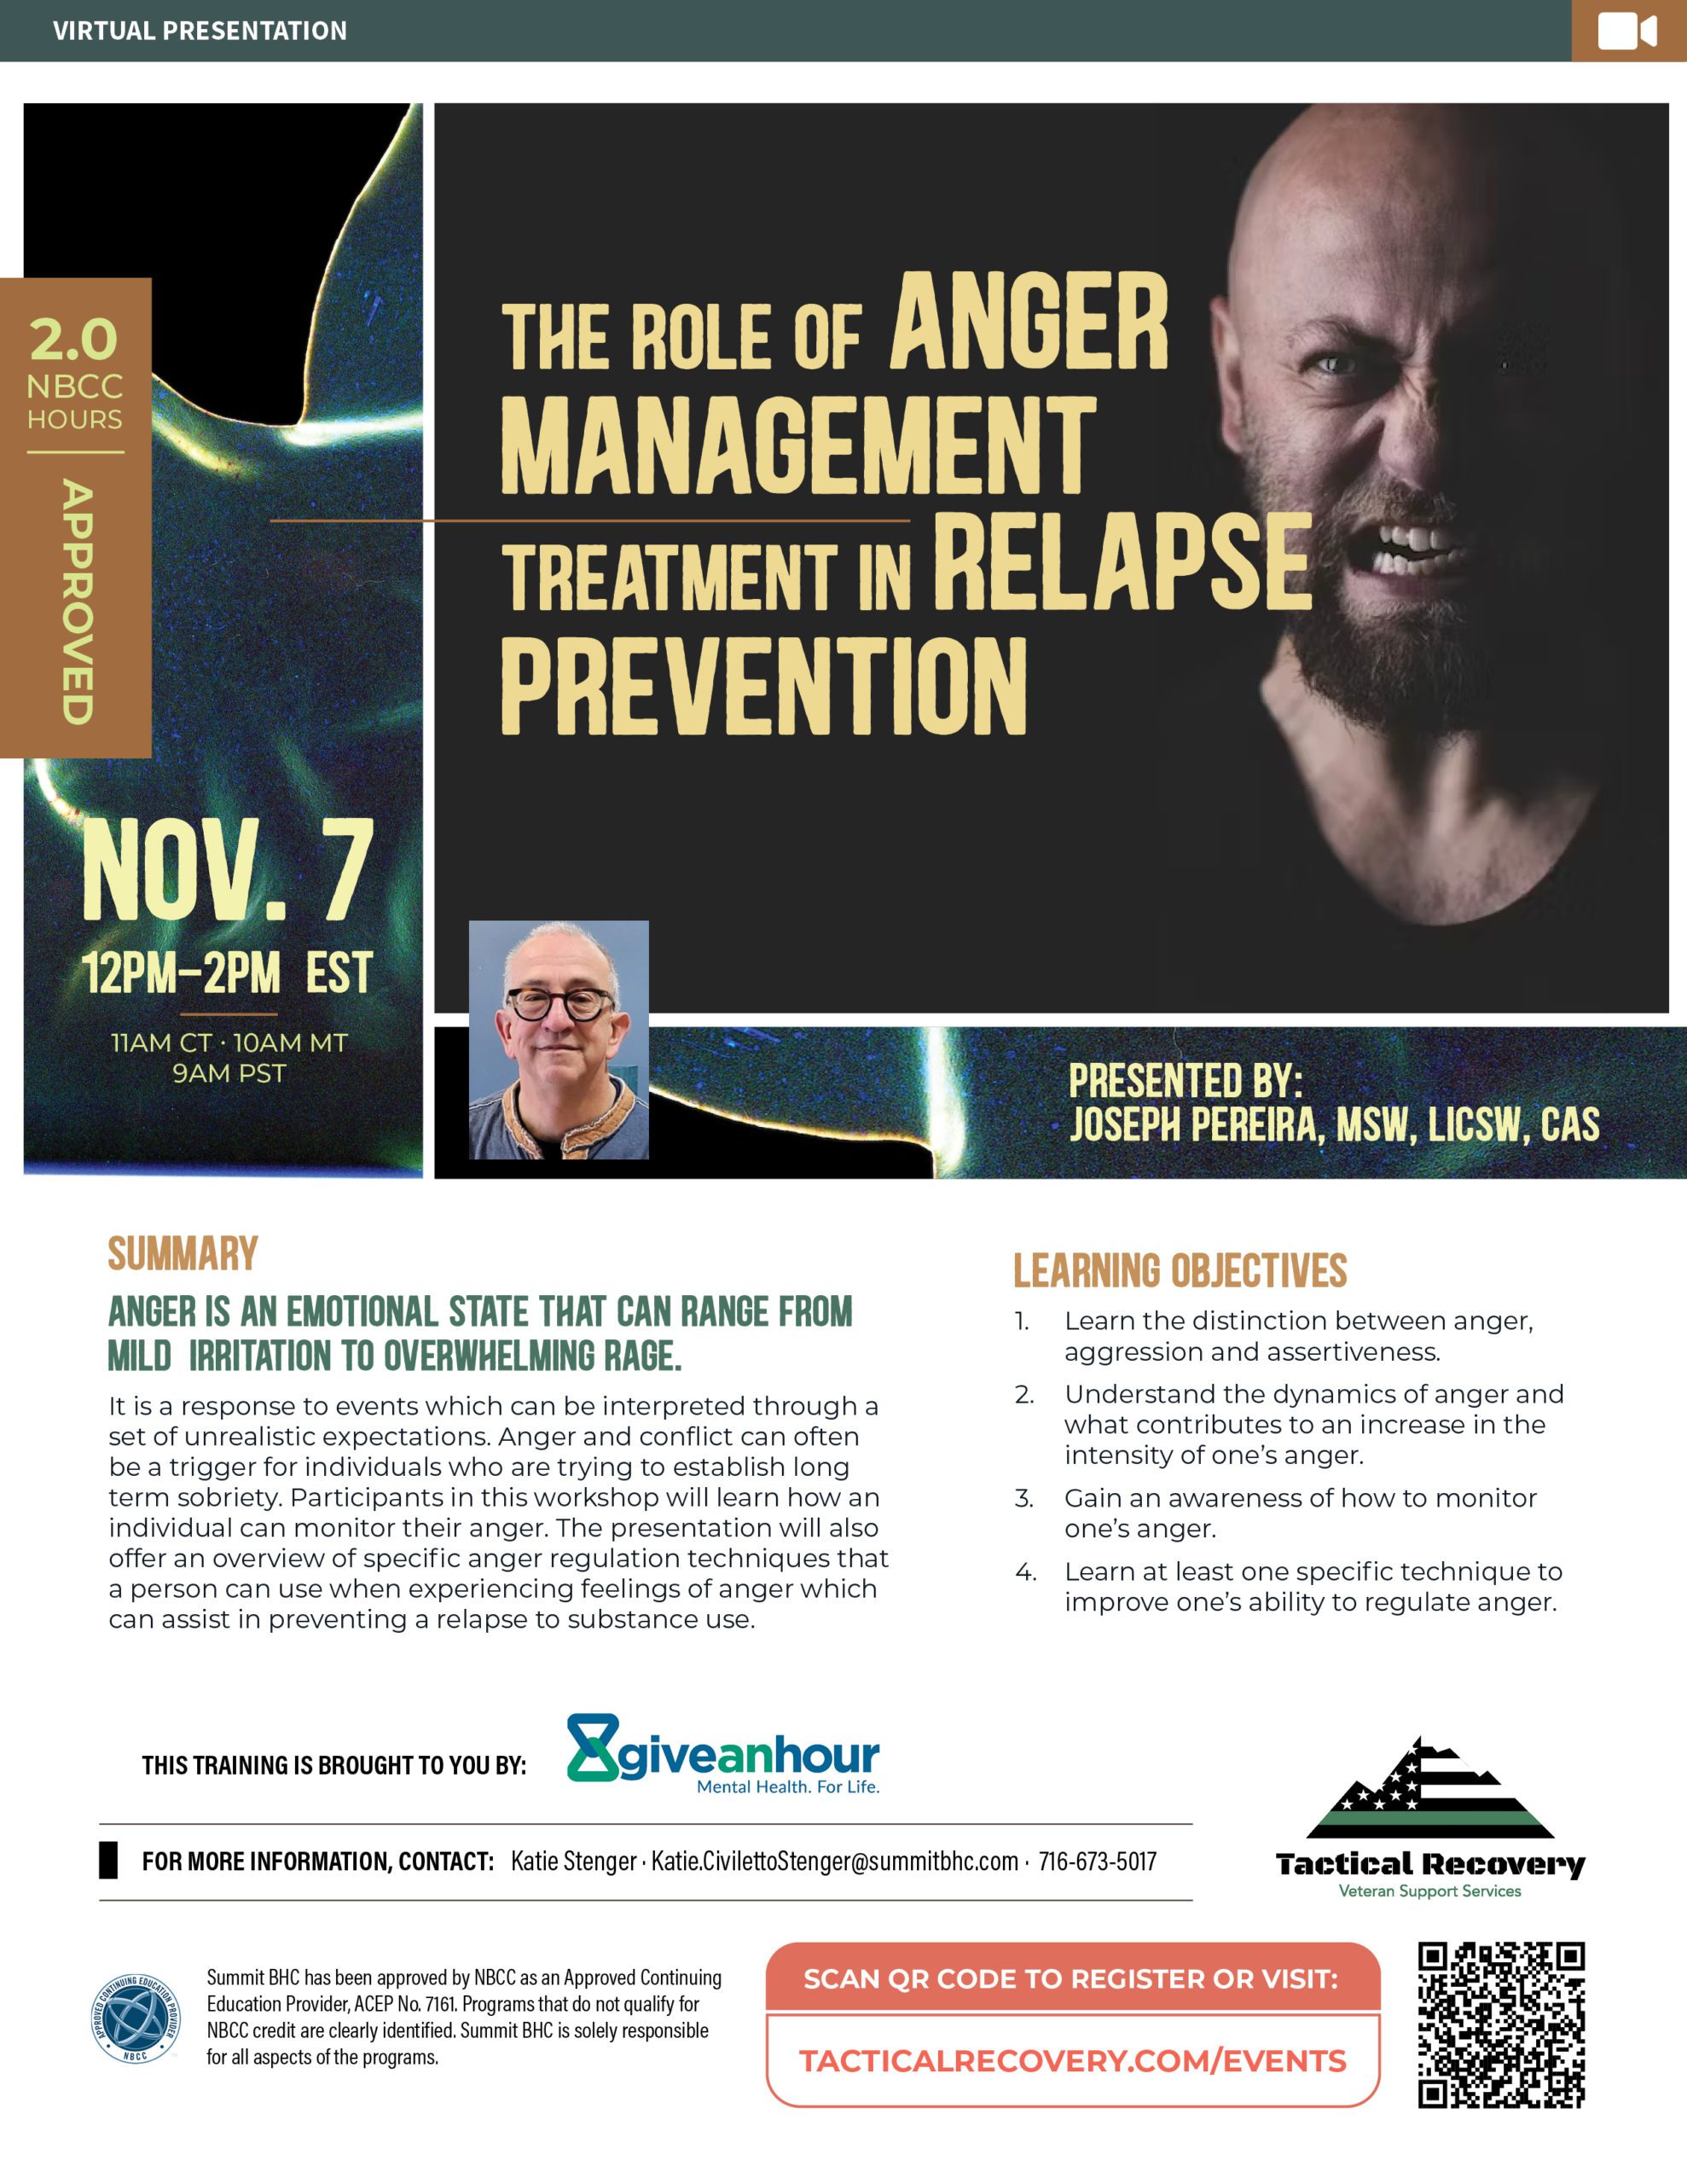 The Role of Anger Management<br />
Treatment in Relapse Prevention